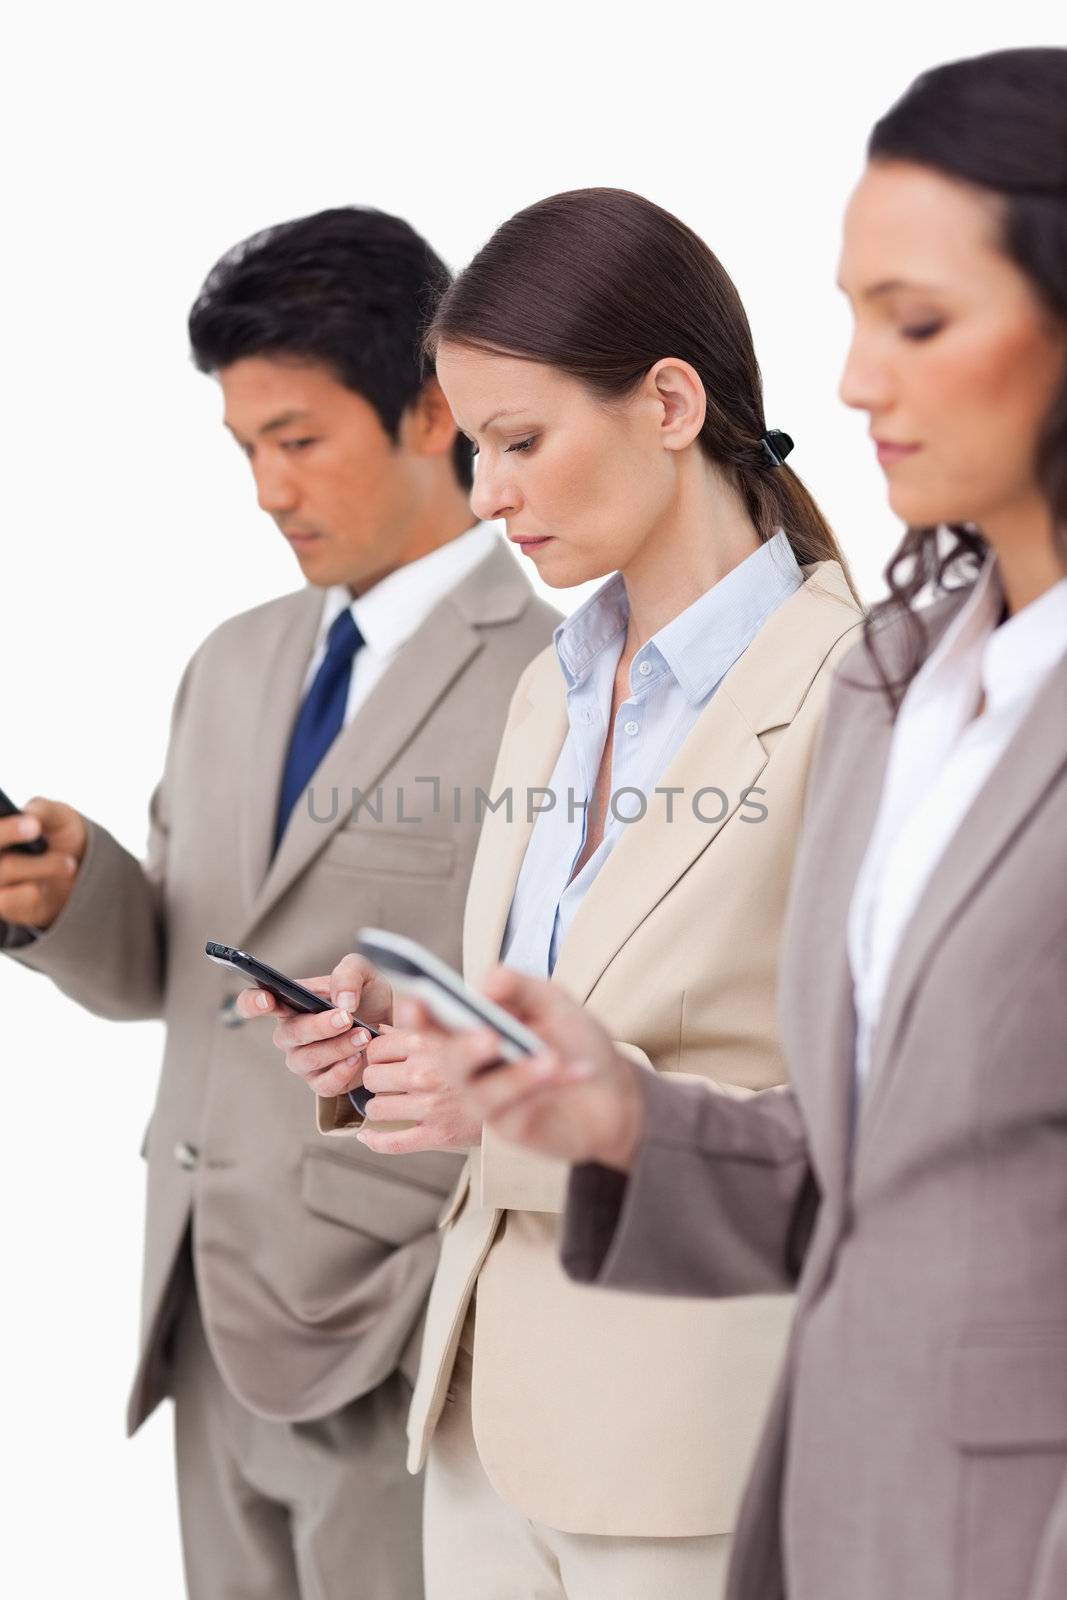 Group of businesspeople with their cellphones against a white background